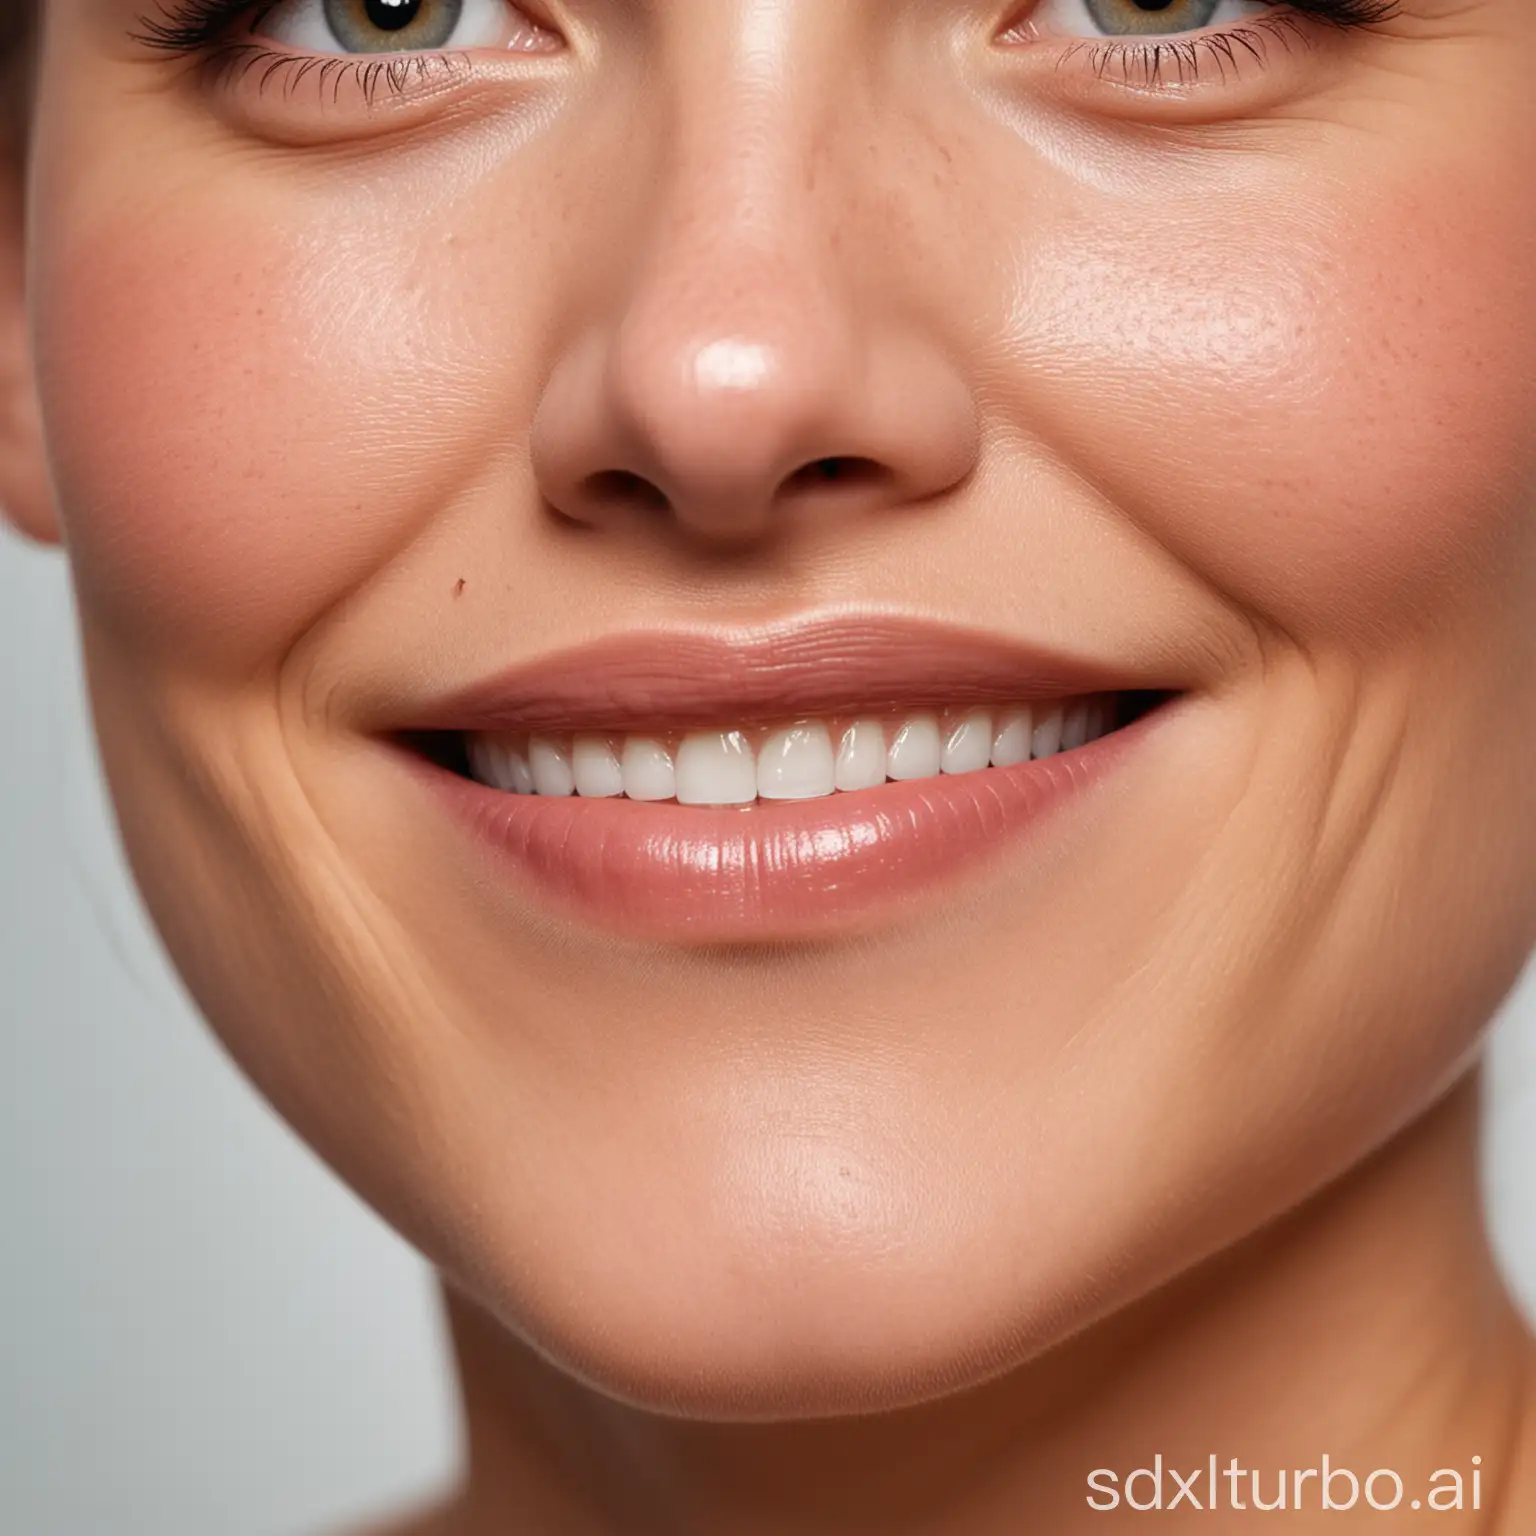 A close-up of a woman's face. Her skin is smooth and radiant, and she is smiling.